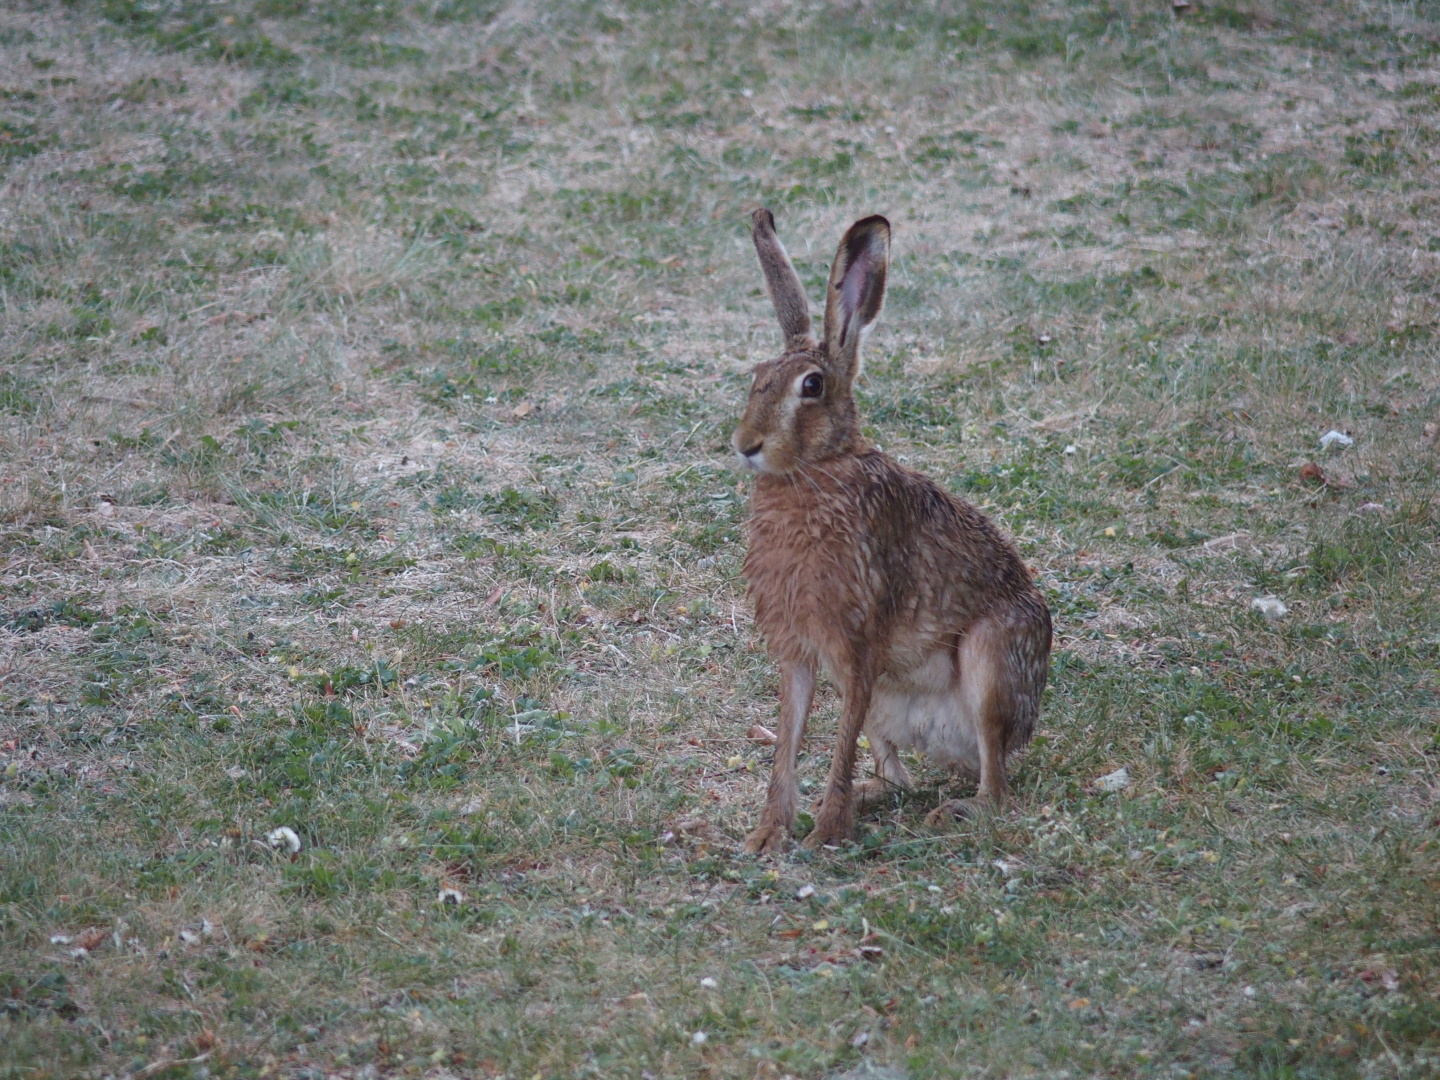 Brown hares are frequent visitors to our private gardens.